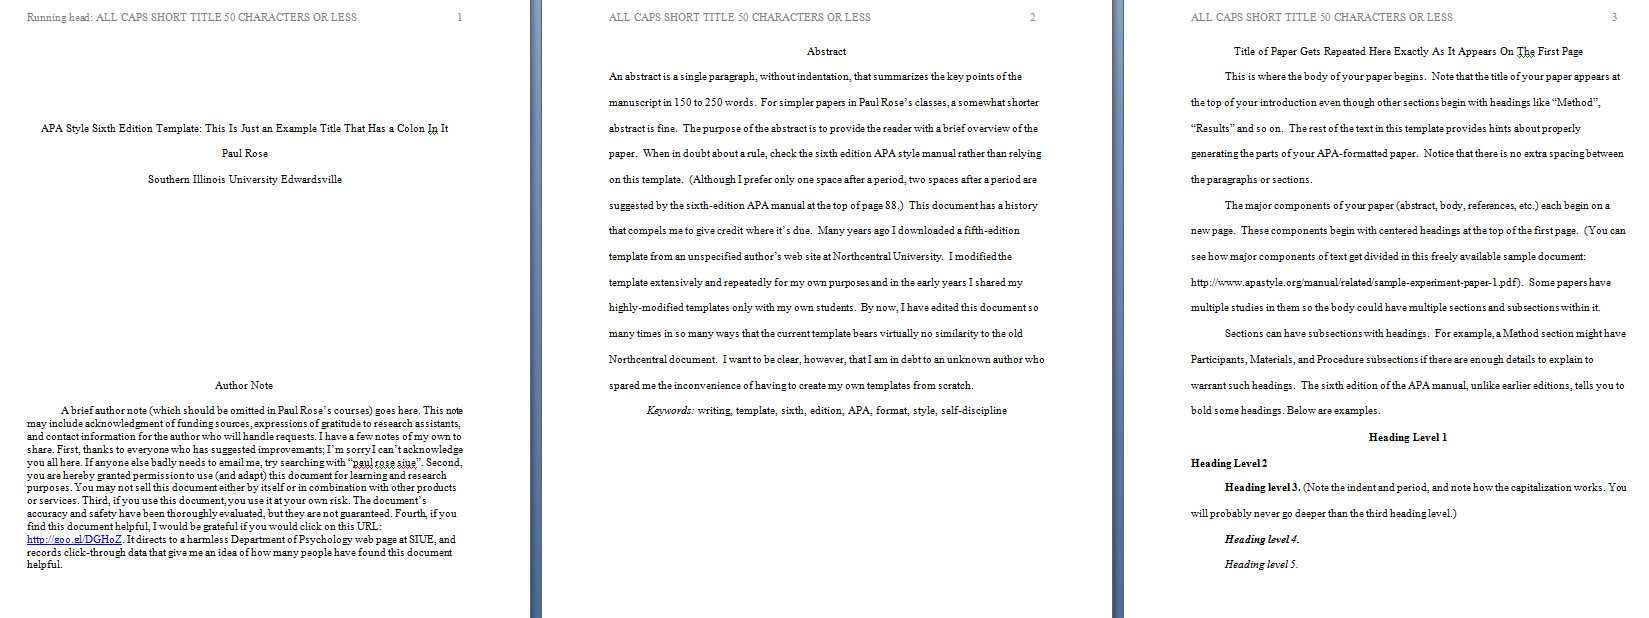 005 Apa Format Template Preview Essay ~ Thatsnotus Intended For Apa Template For Word 2010